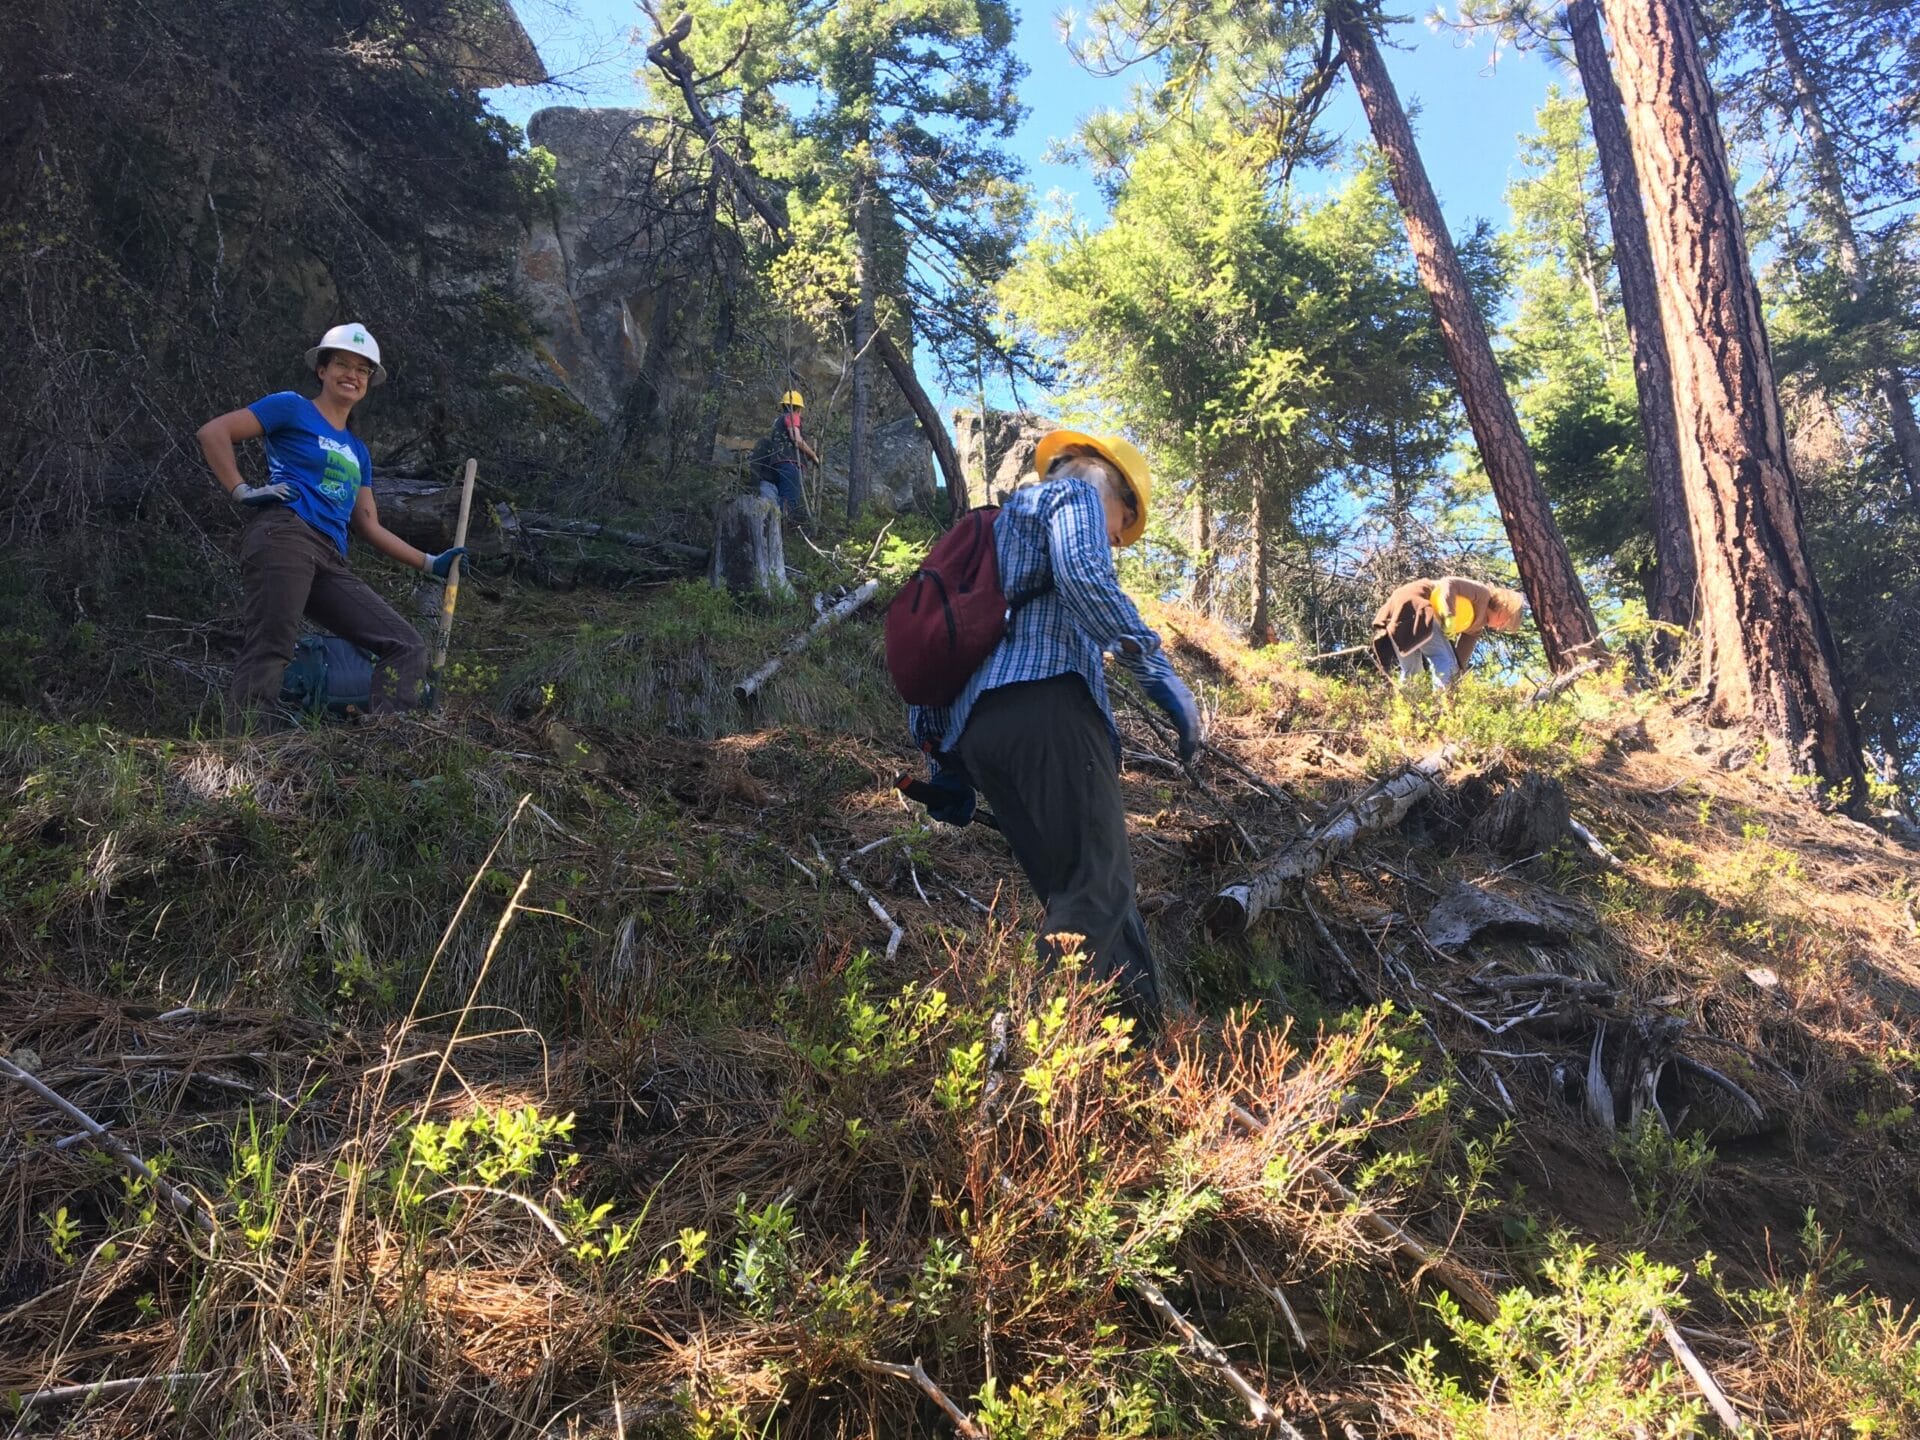 Volunteers clearing brush from an area on a hill in front of a rock formation